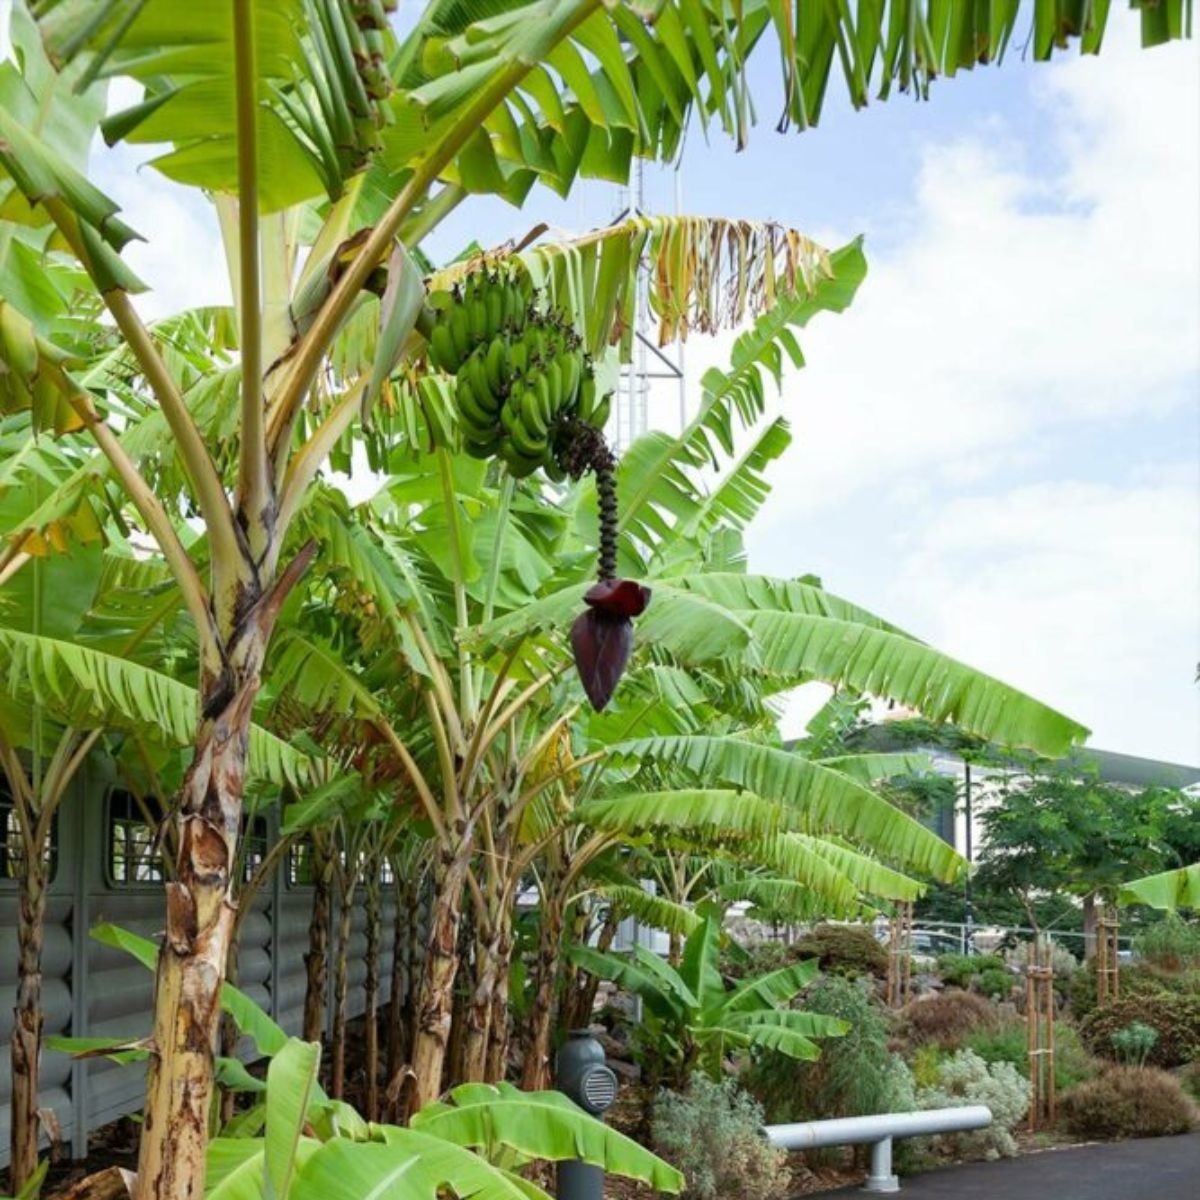 check-out-this-intriguing-banana-garden-designed-by-menis-architects-featured